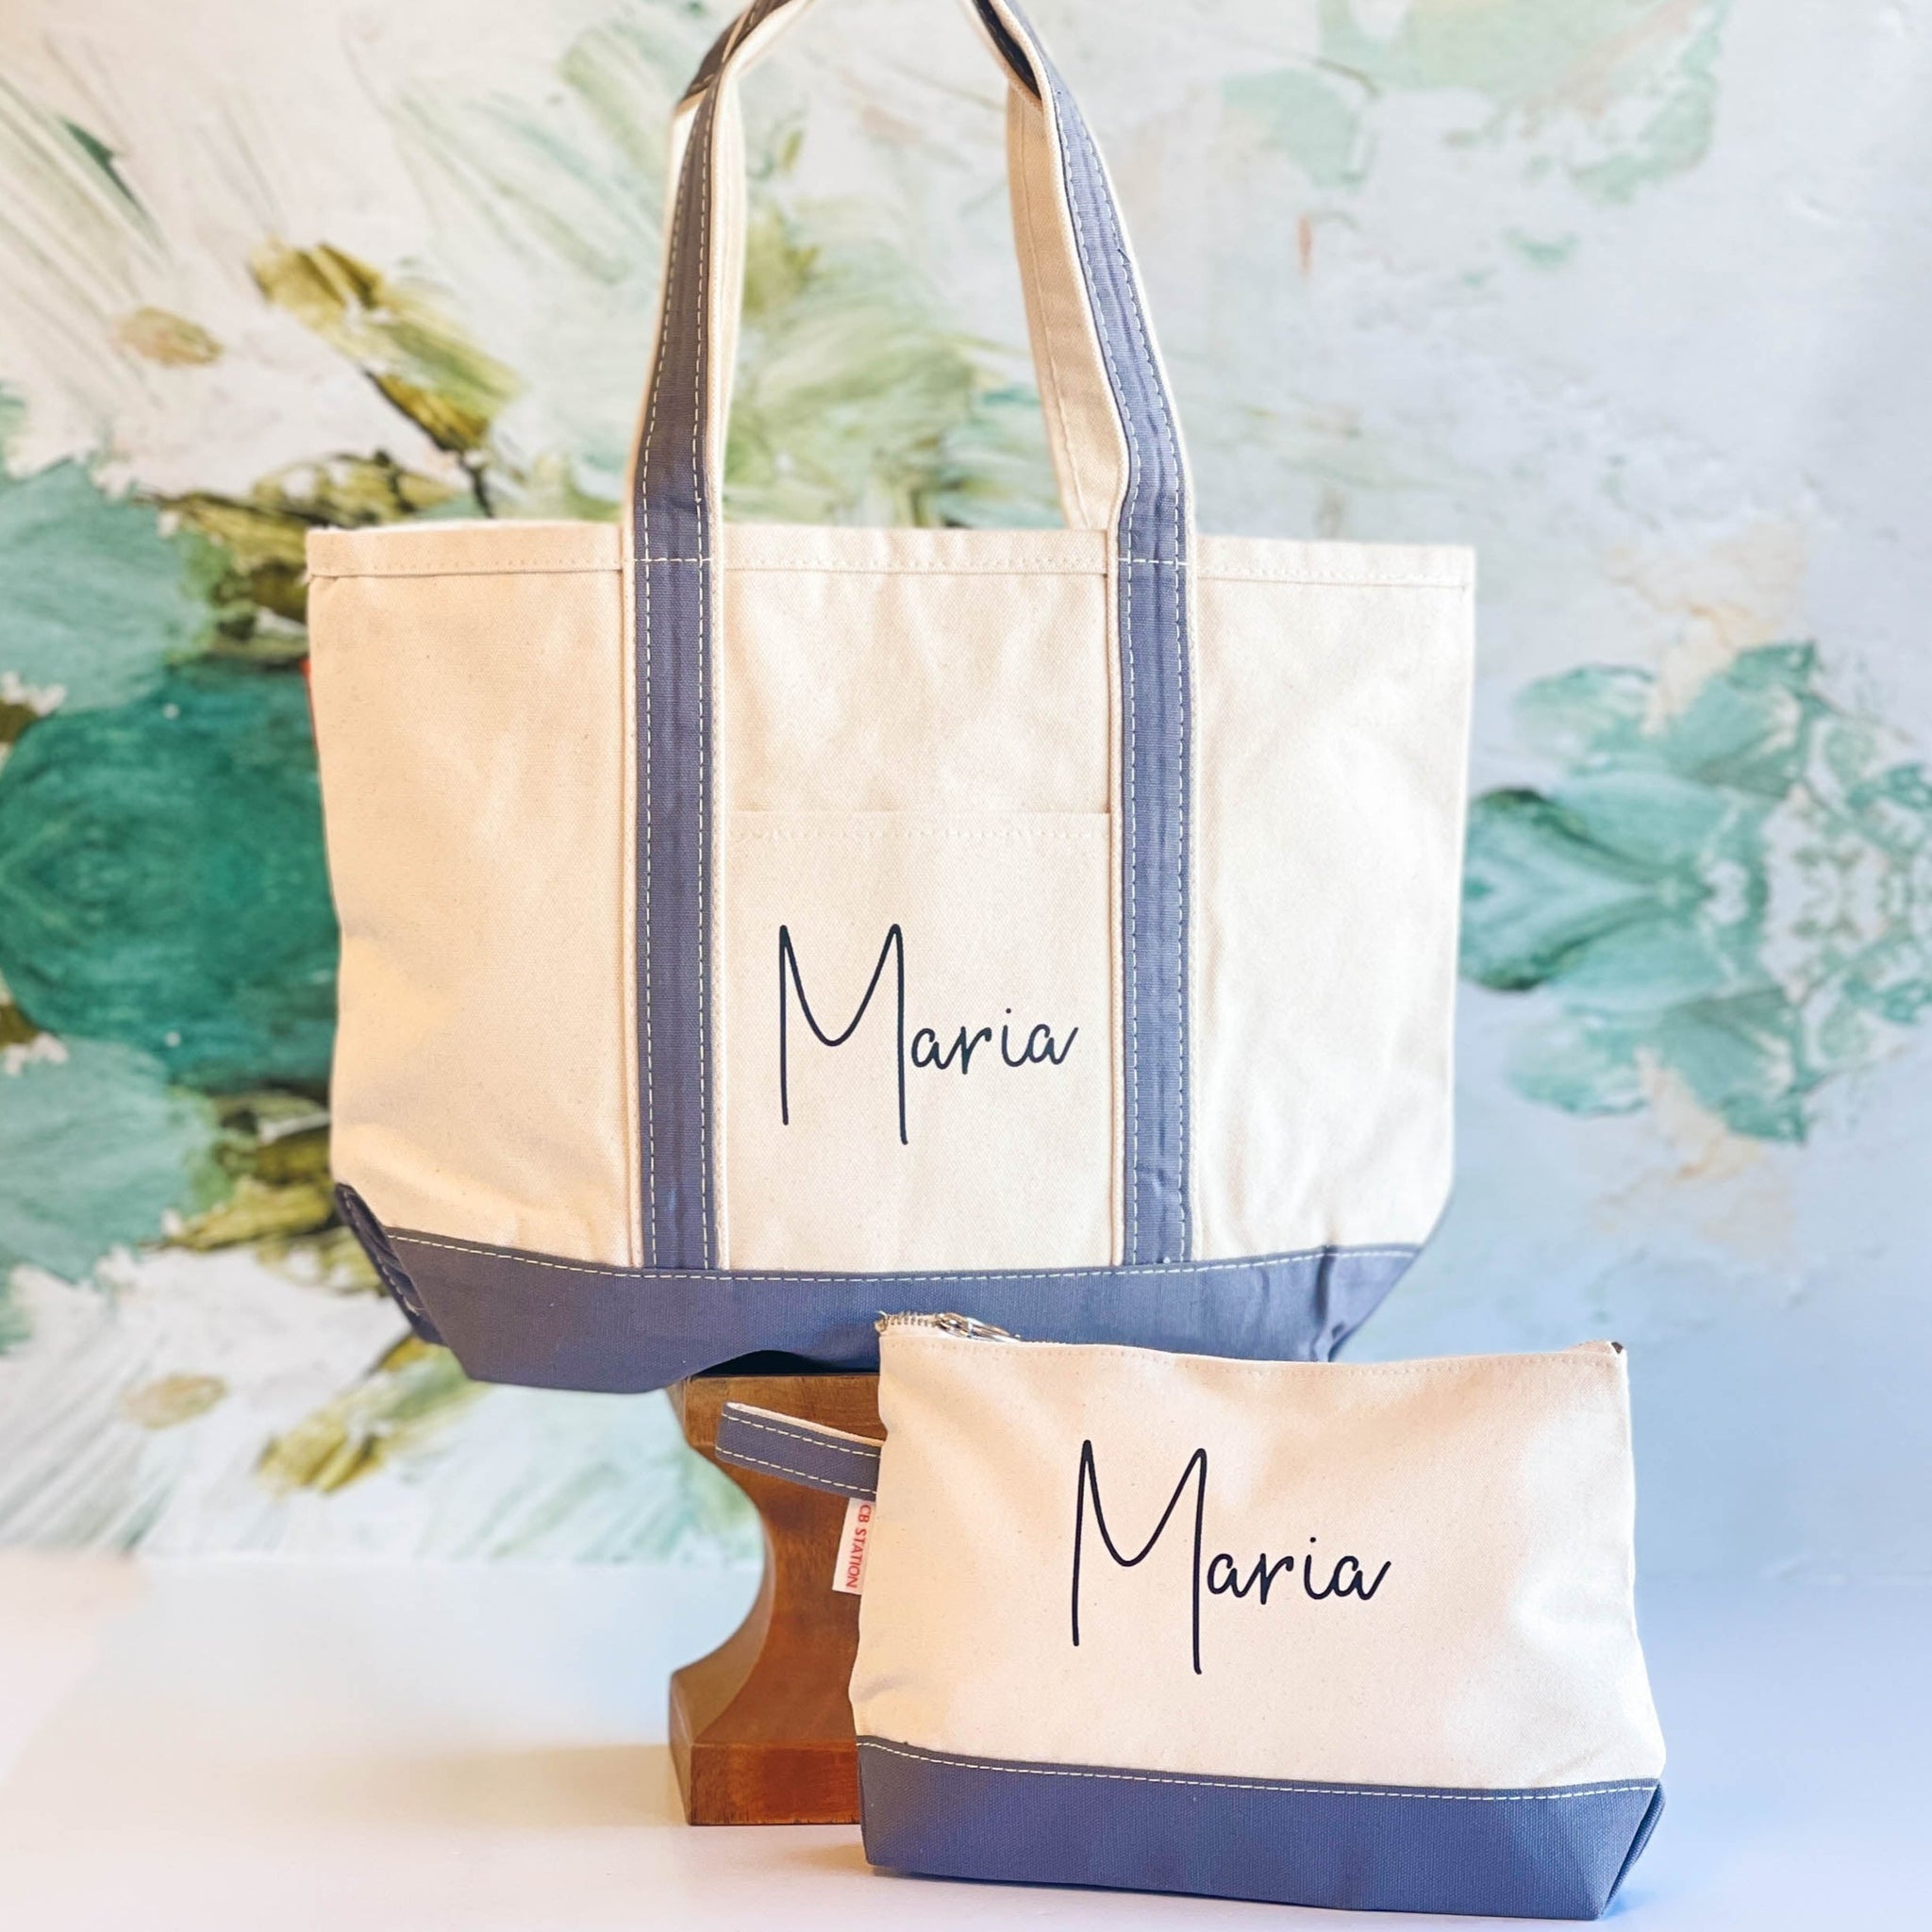 Personalized Tote Bag and Organizer - On the Go Travel Set - LaLa